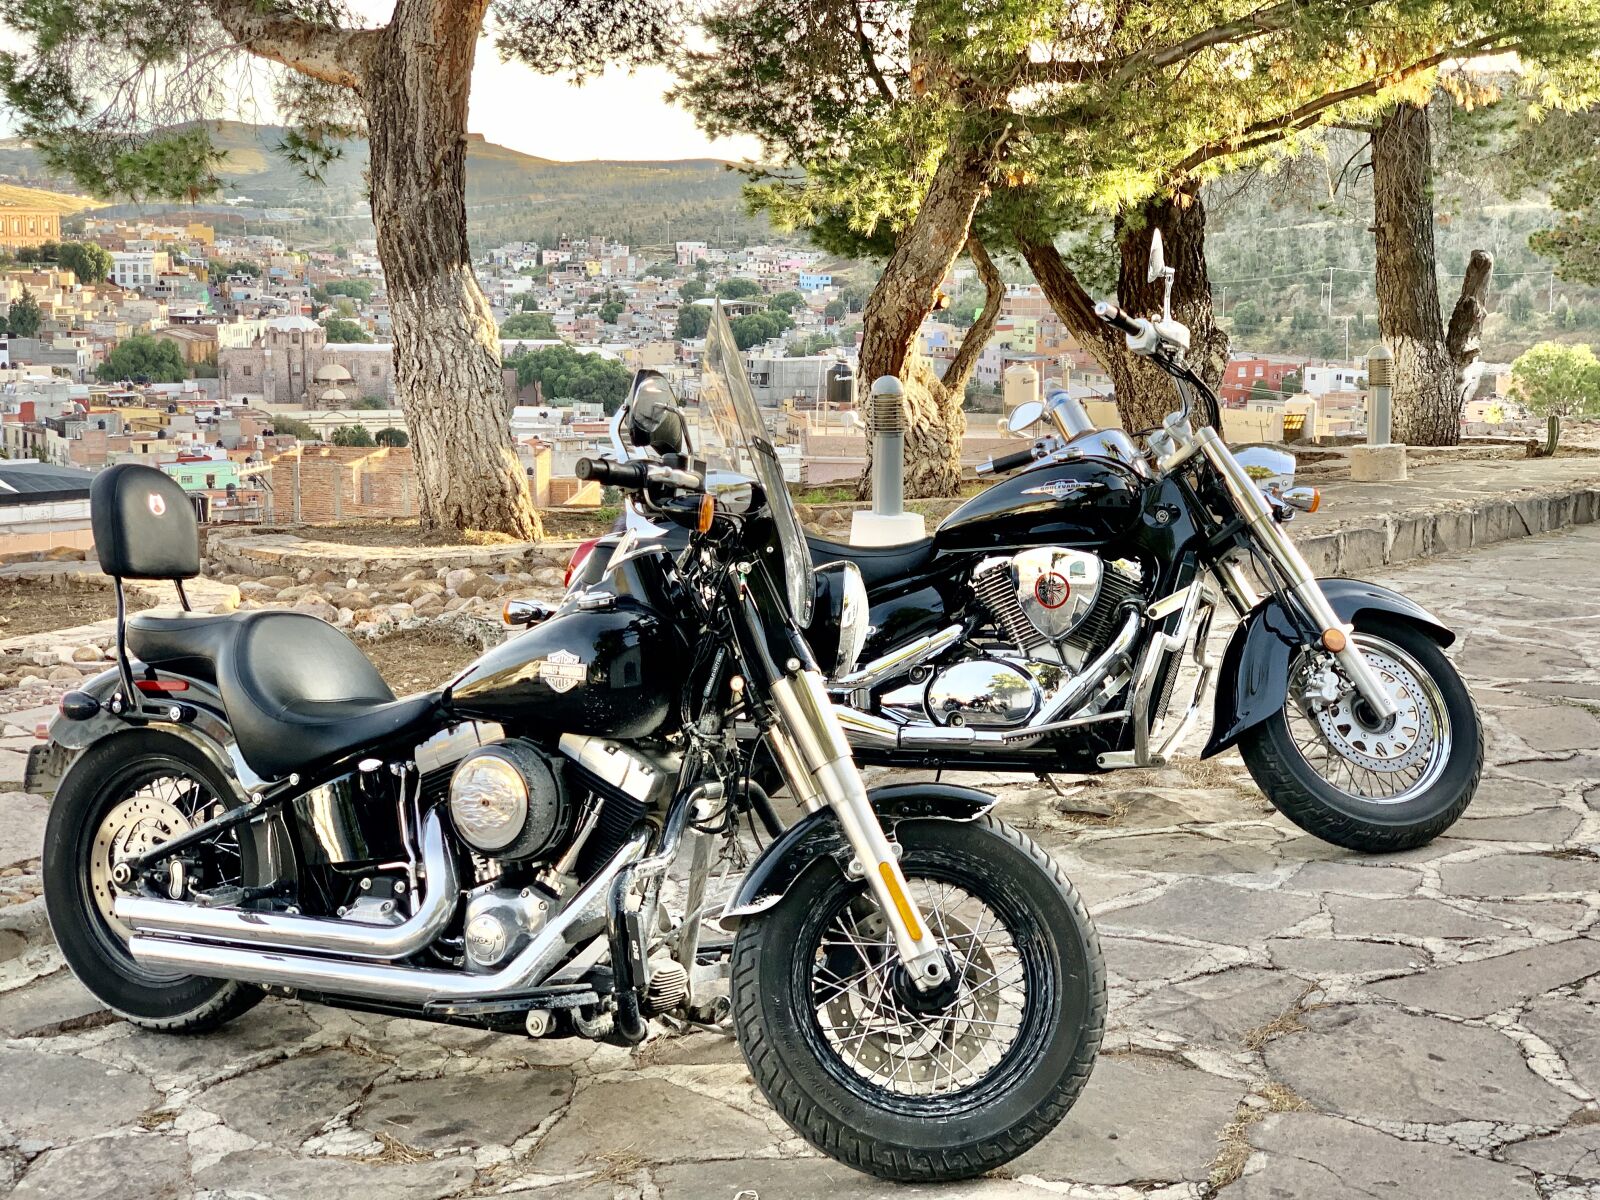 iPhone XS back dual camera 6mm f/2.4 sample photo. Motorcycles, fun, routes photography